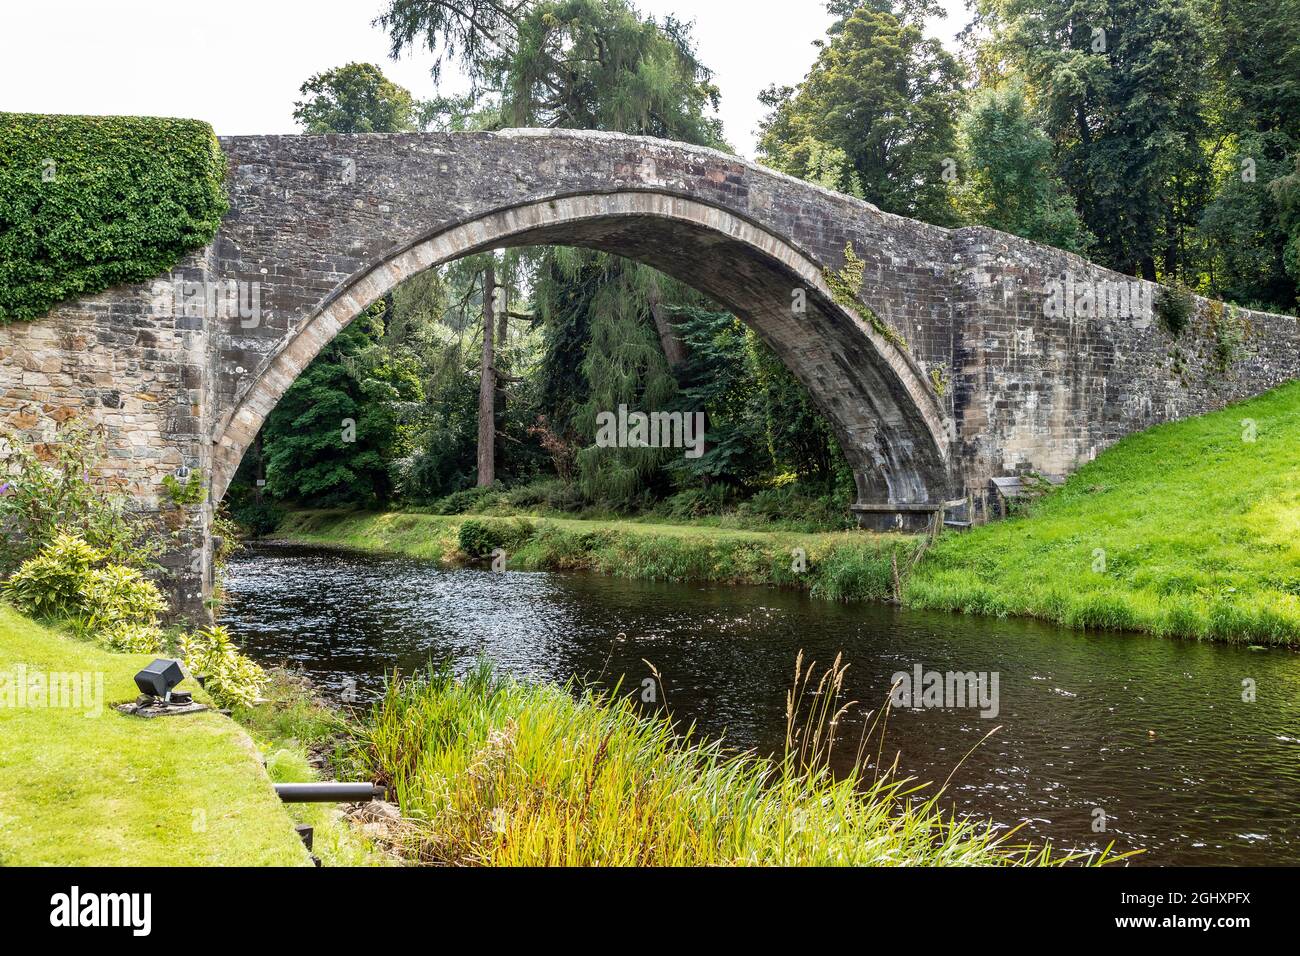 The Auld Brig o' Doon or Tam's Brig as mentioned in Tam O'Shanter, a poem by Robert Burns, Alloway, Ayr, Ayrshire, Scotland, UK Stock Photo